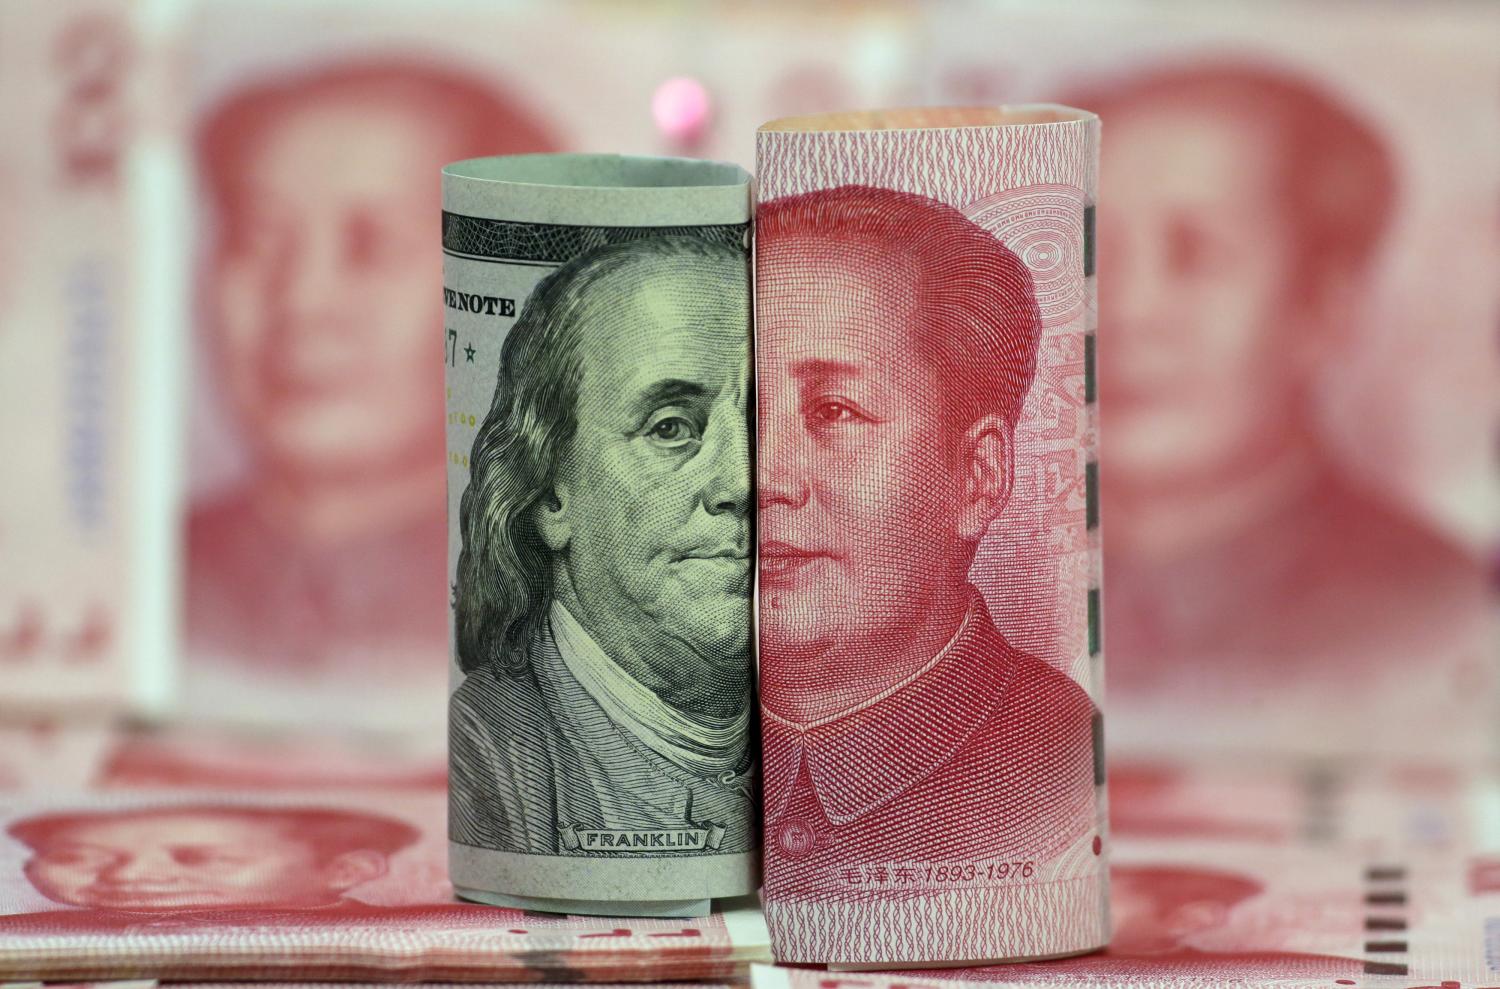 A Benjamin Franklin U.S. 100-dollar banknote and a Chinese 100-yuan banknote depicting the late Chinese Chairman Mao Zedong, are seen in a picture illustration in Beijing, China, January 21, 2016. REUTERS/Jason Lee - GF20000103031